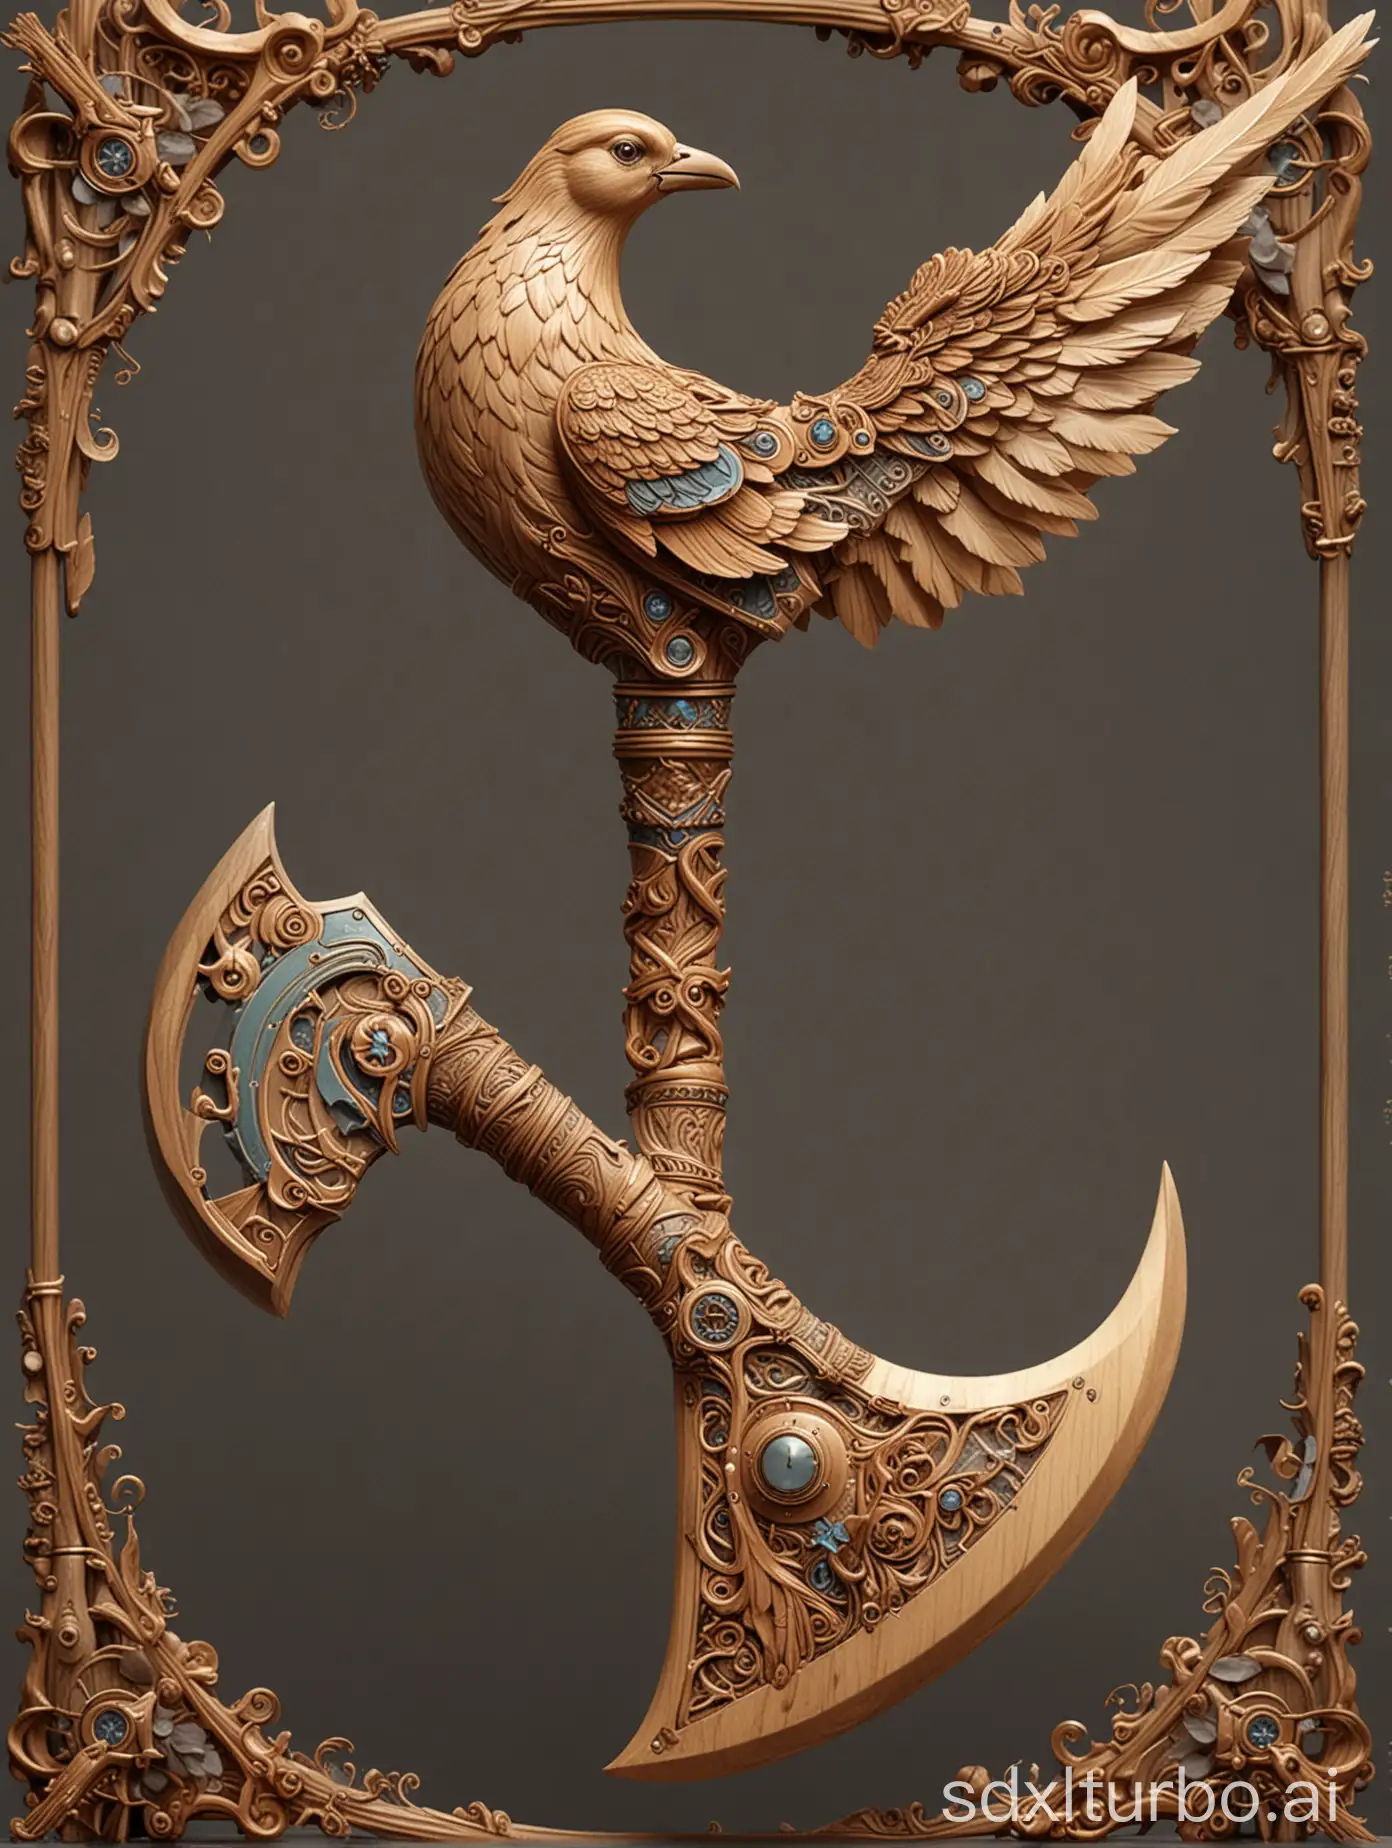 A fantasy design of a magical axe, with the shape of a futuristic bird, decorated with traditional elements, wooden time, in the style of Leyendecker.